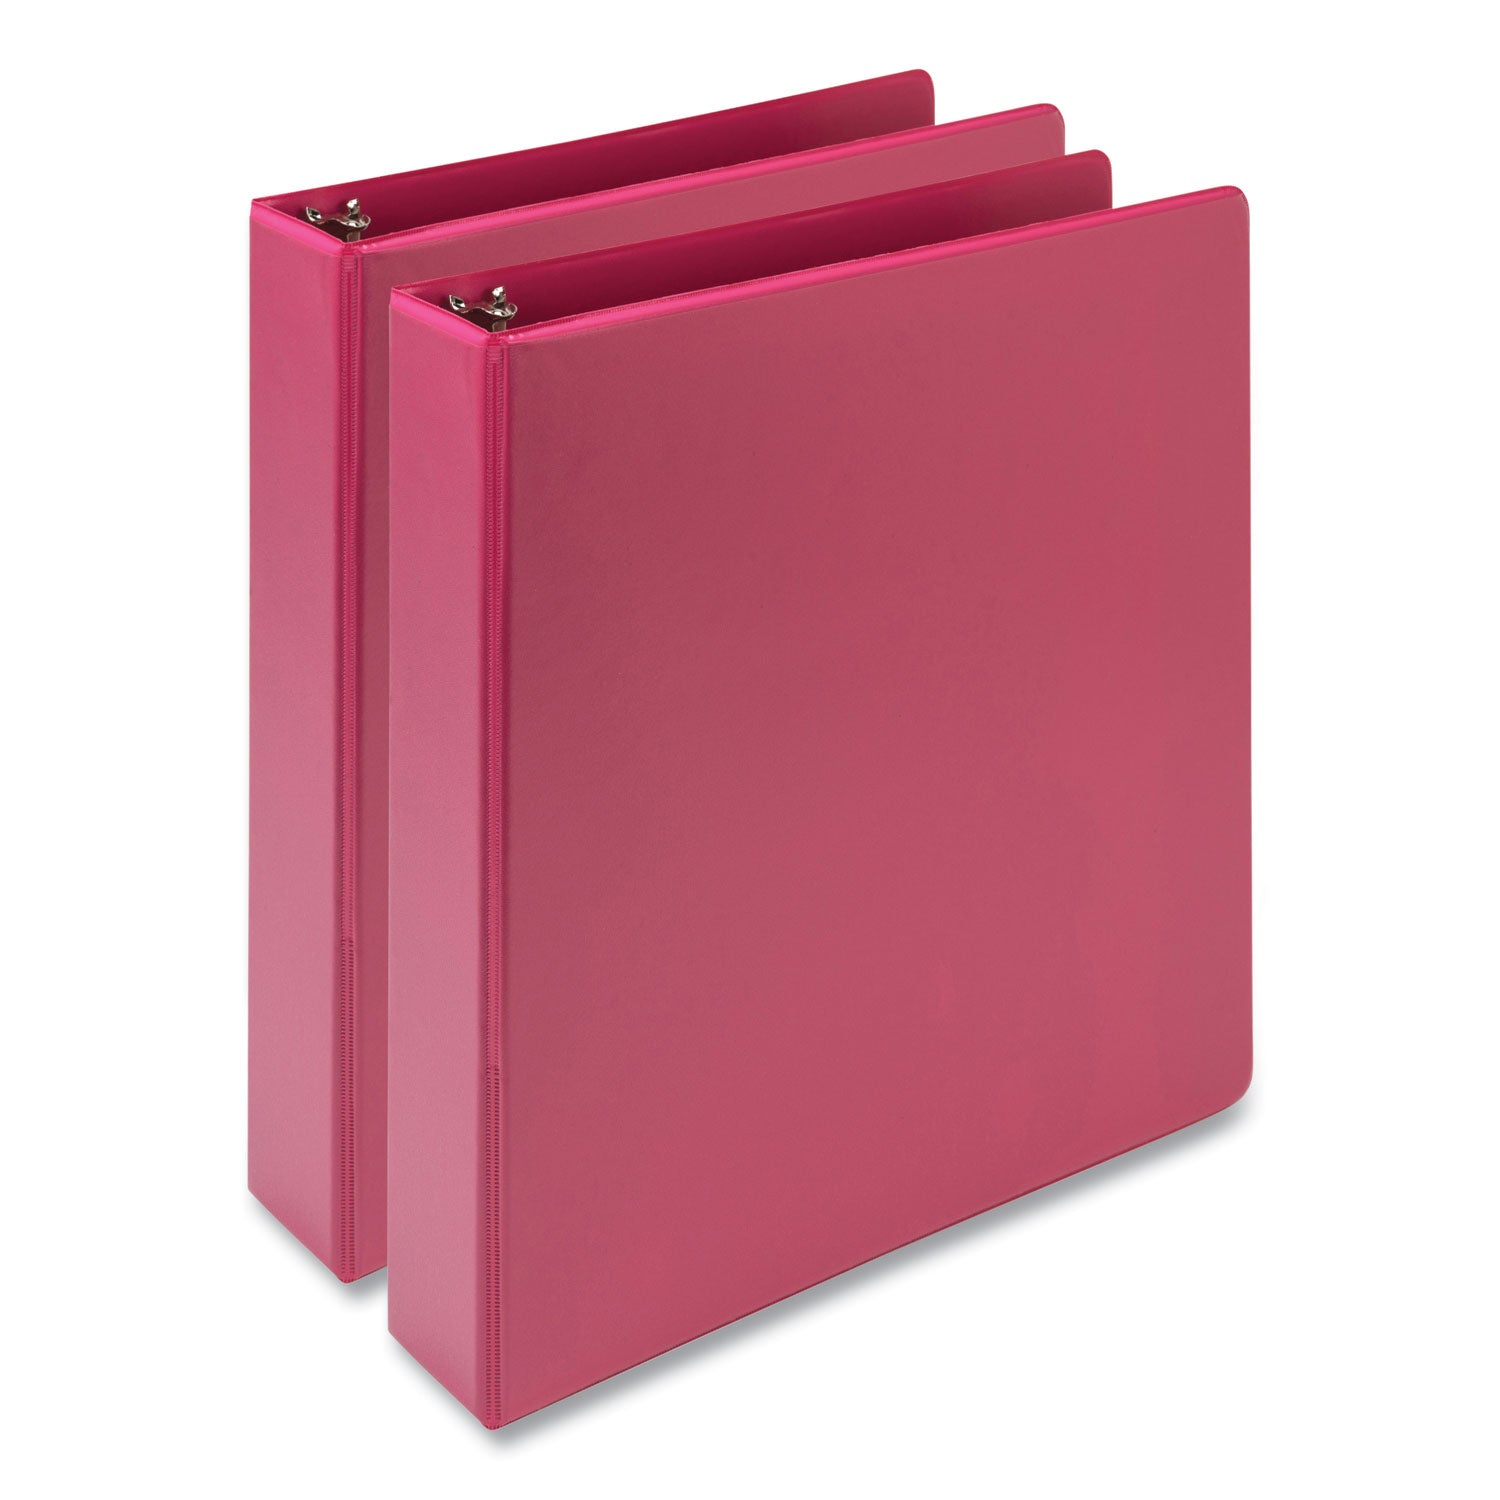 earths-choice-plant-based-economy-round-ring-view-binders-3-rings-15-capacity-11-x-85-pink-2-pack_sammp286576 - 1